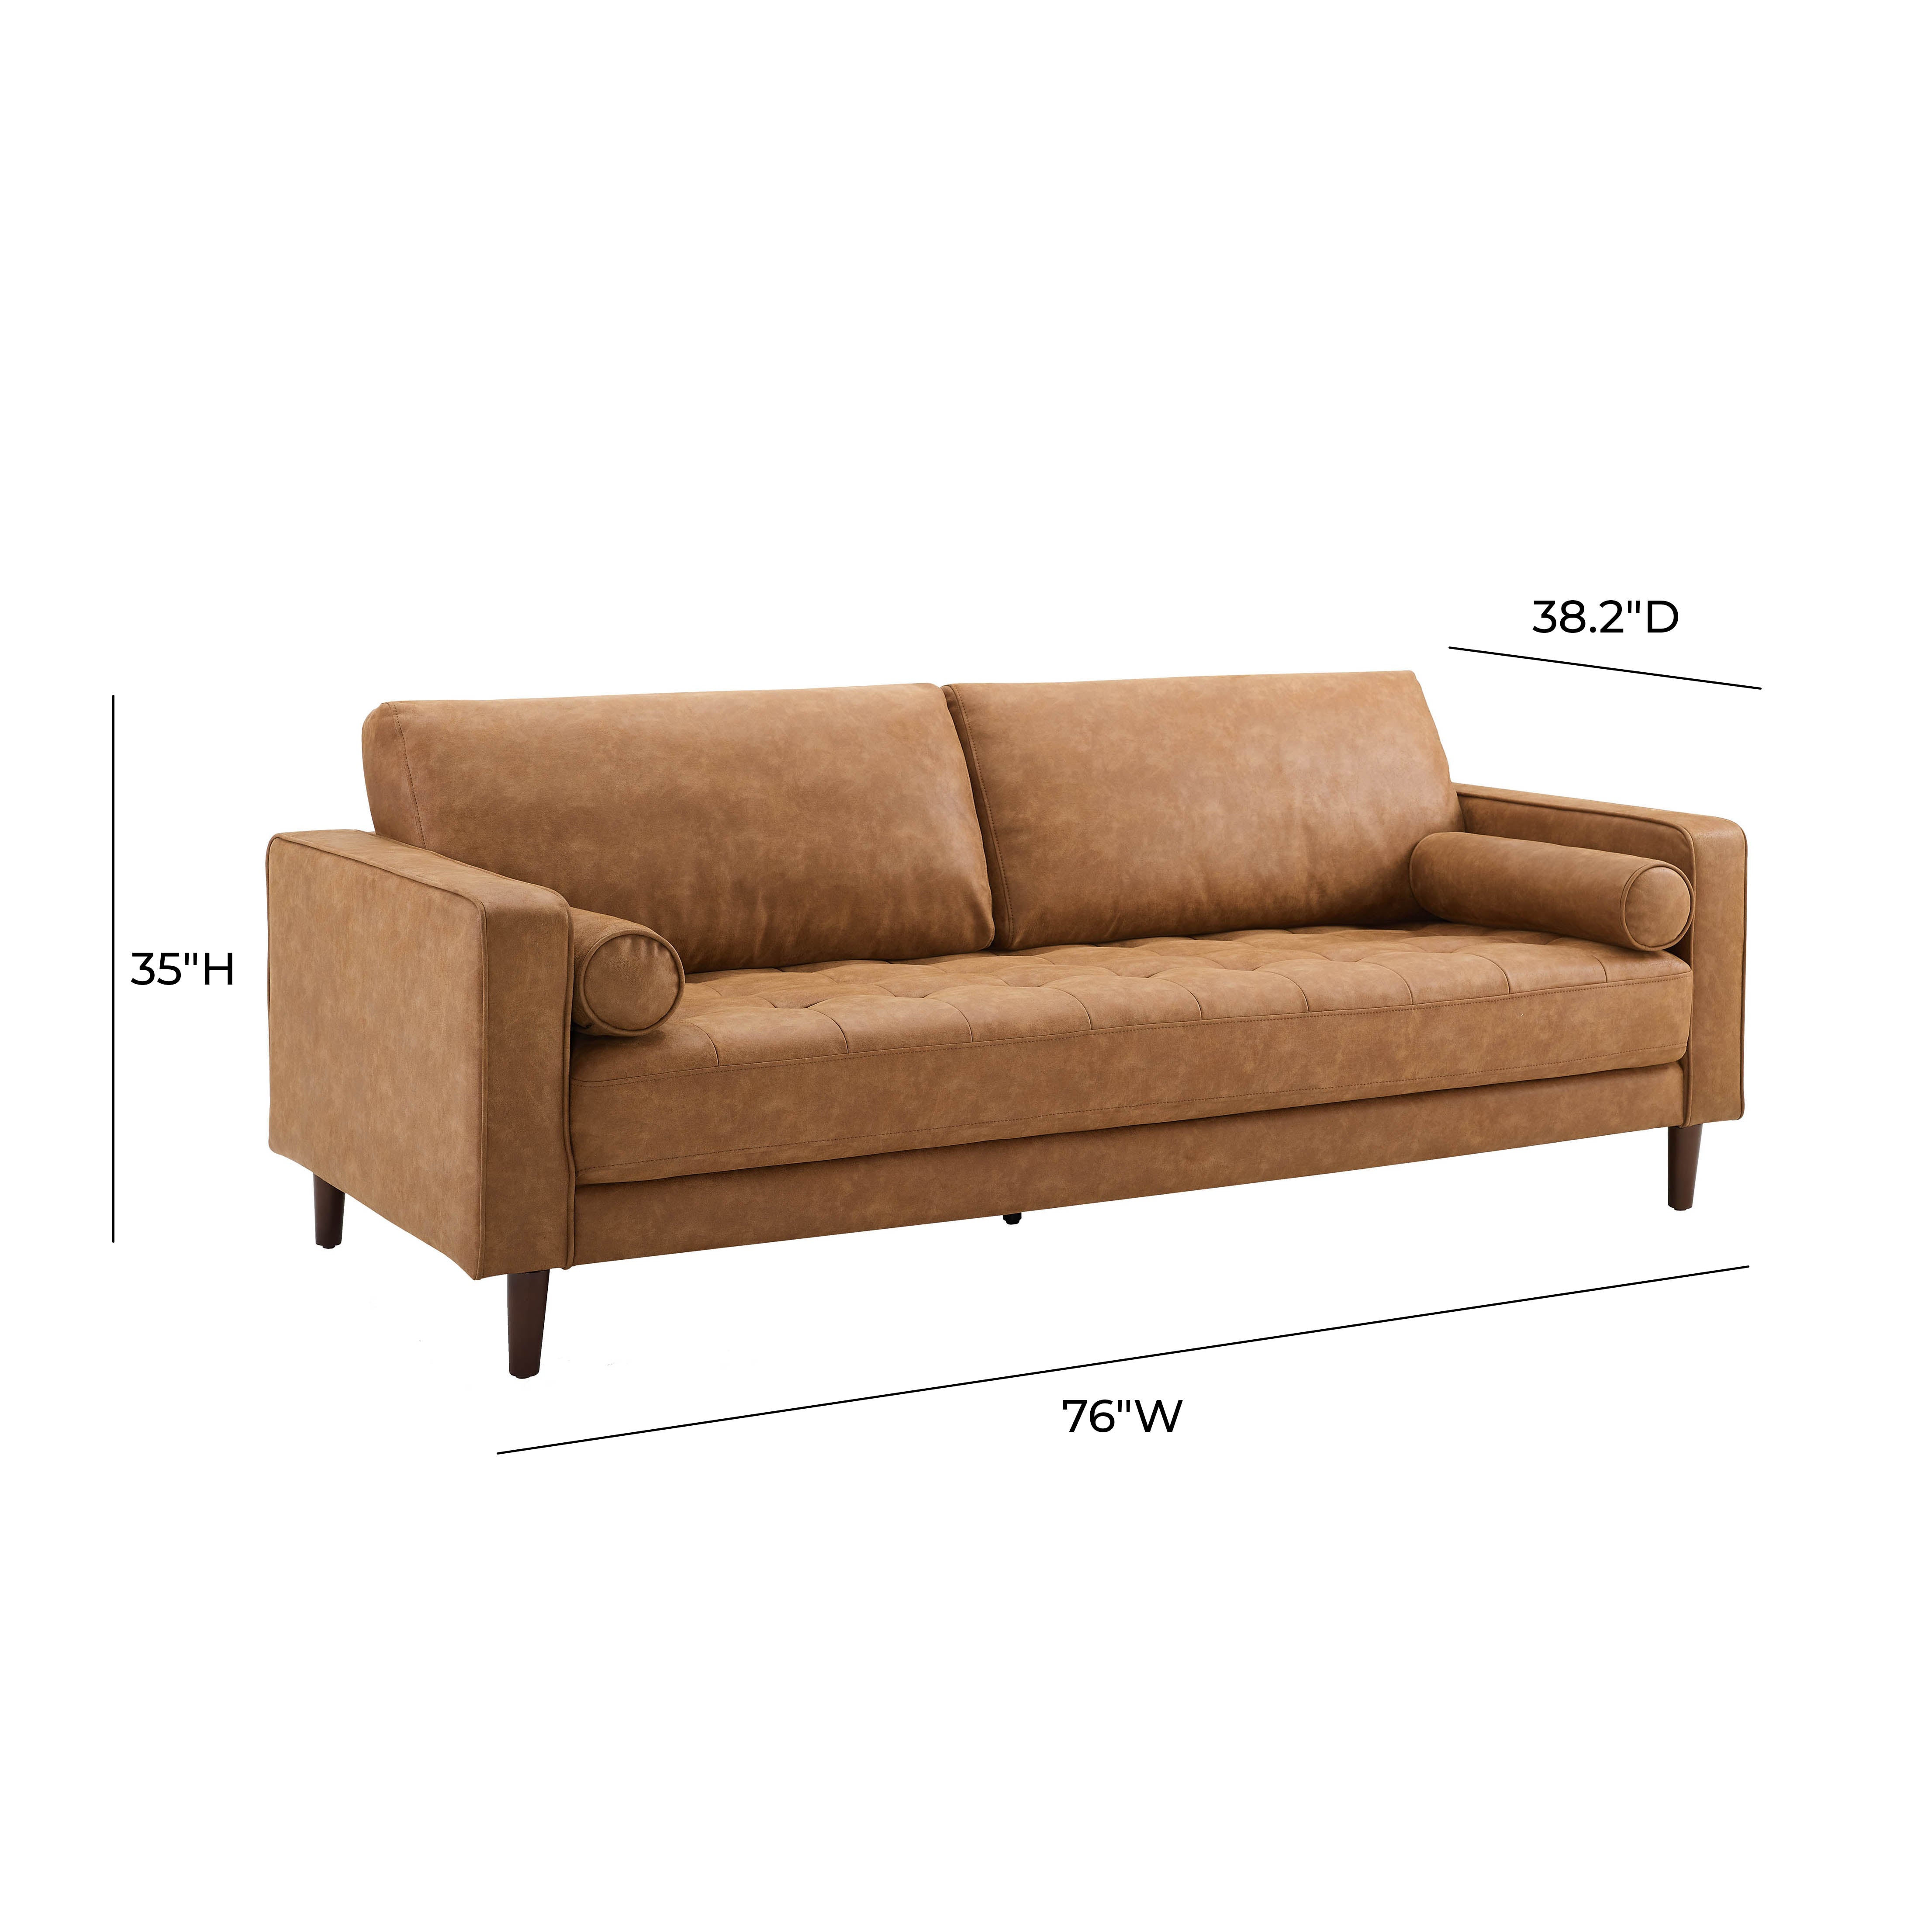 CAVE BROWN SOFA 76-INCH